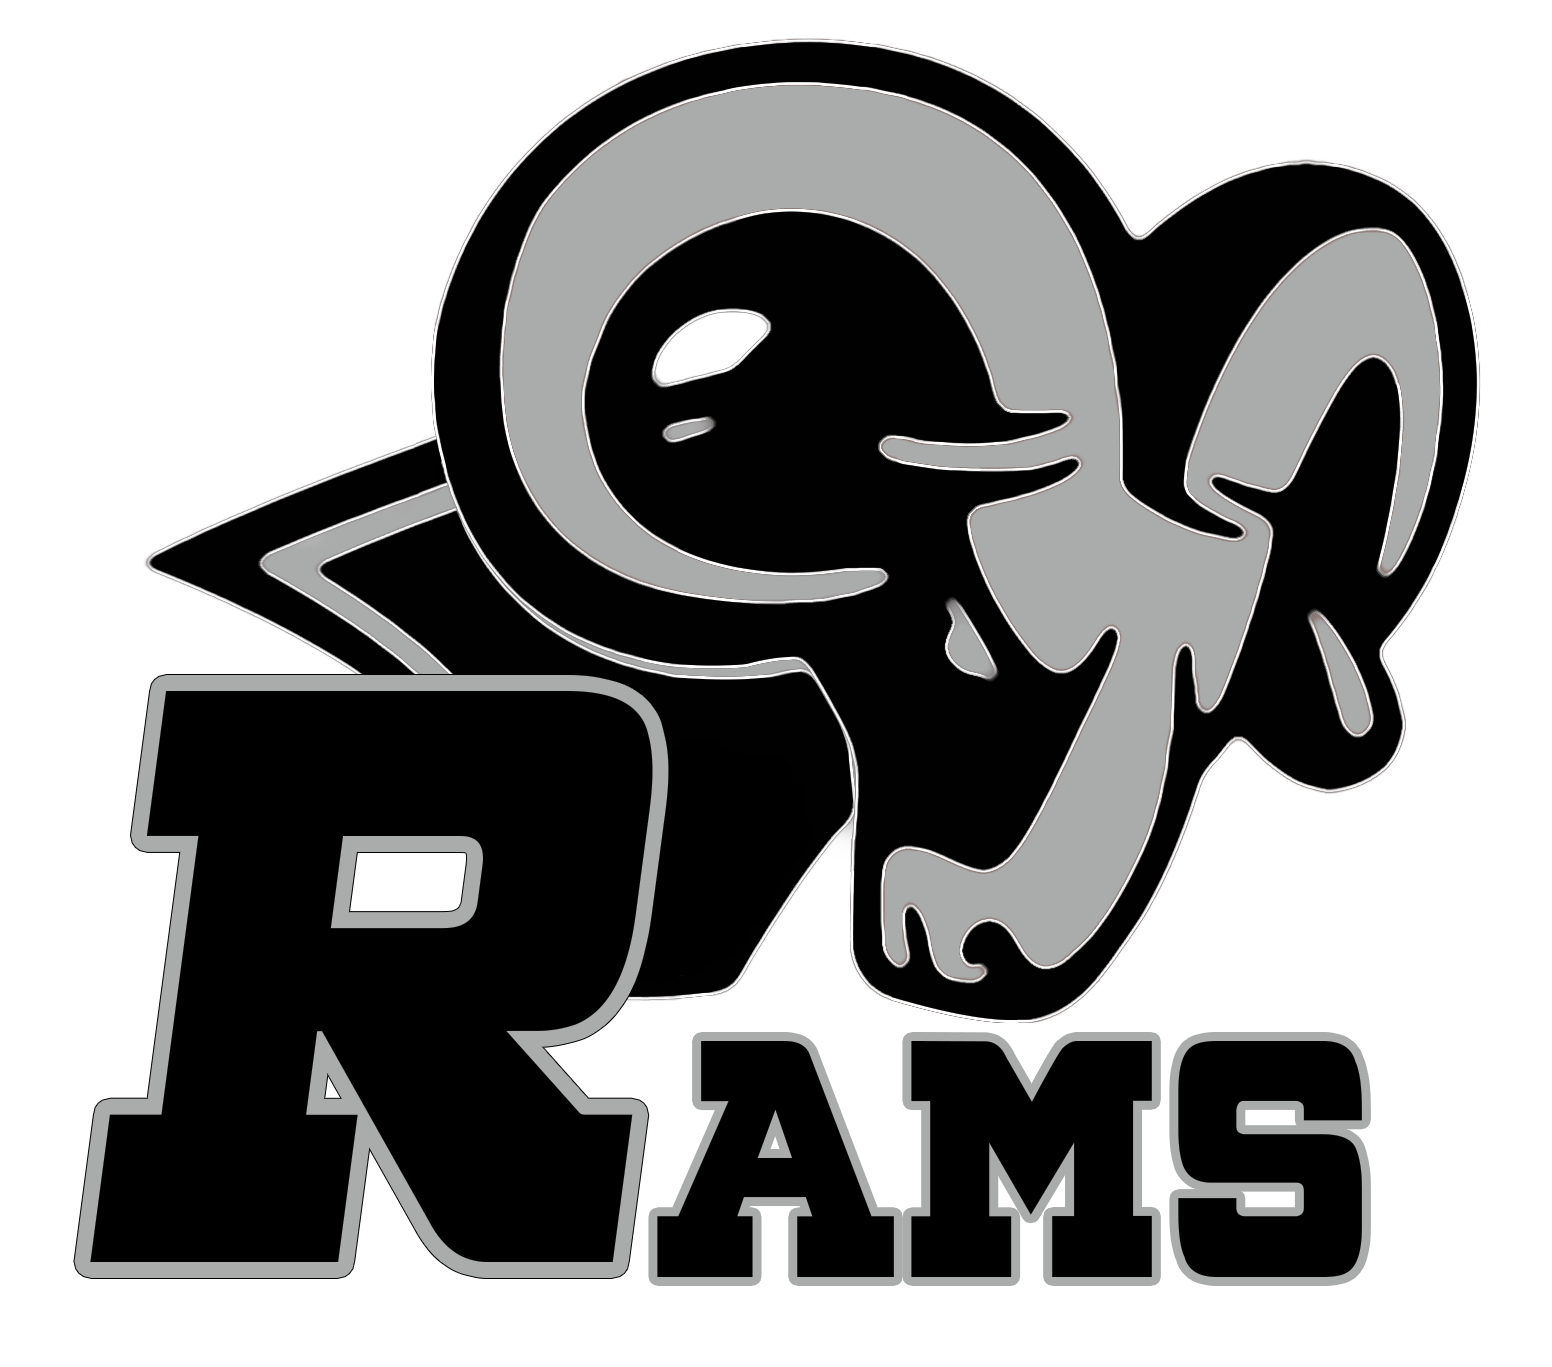  collection of ram. Club clipart middle school